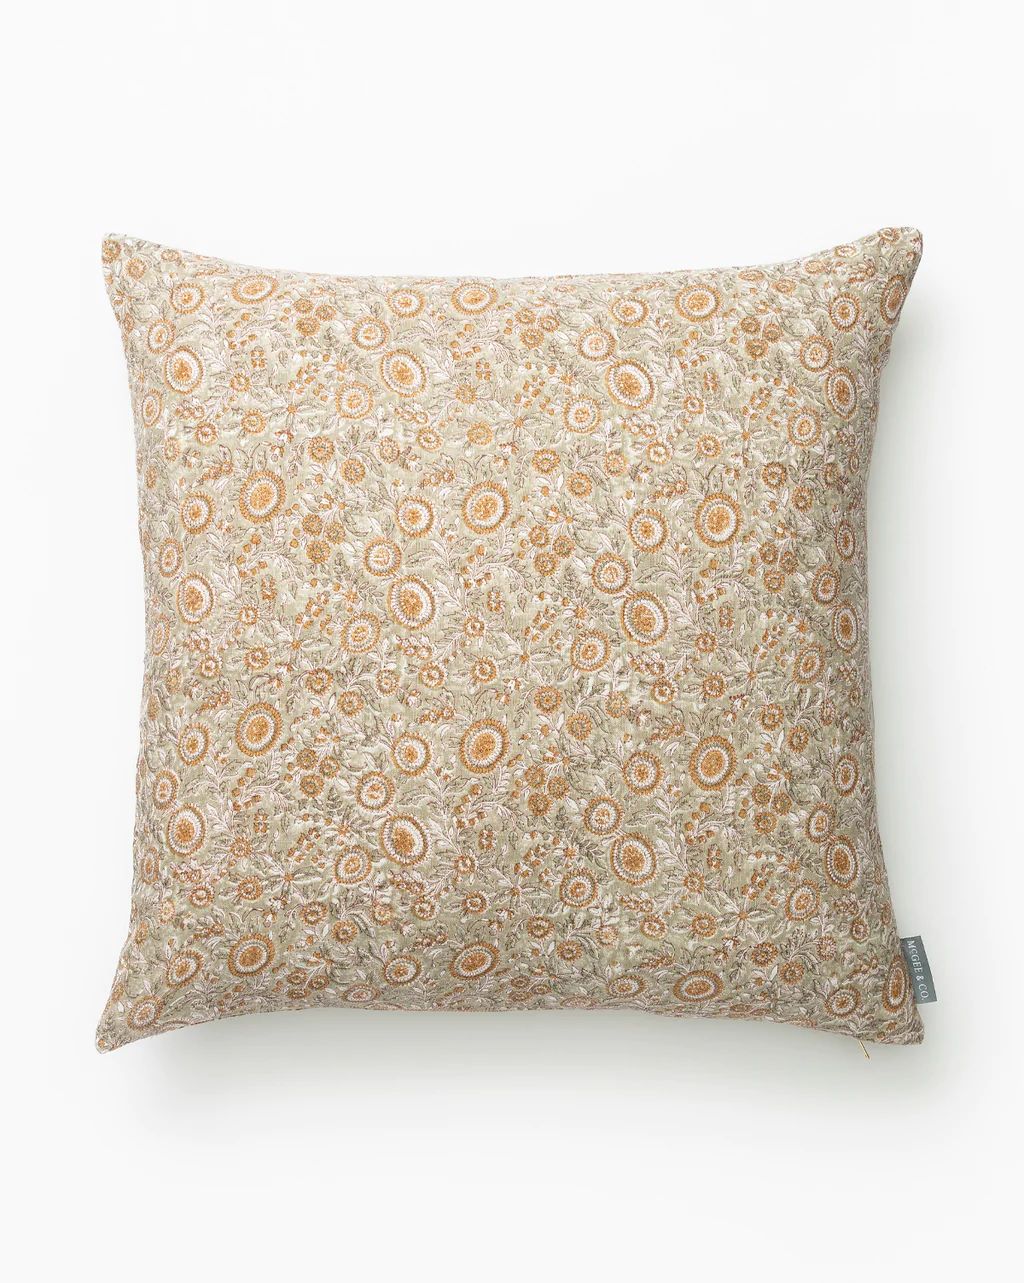 Anora Block Print Pillow Cover | McGee & Co.